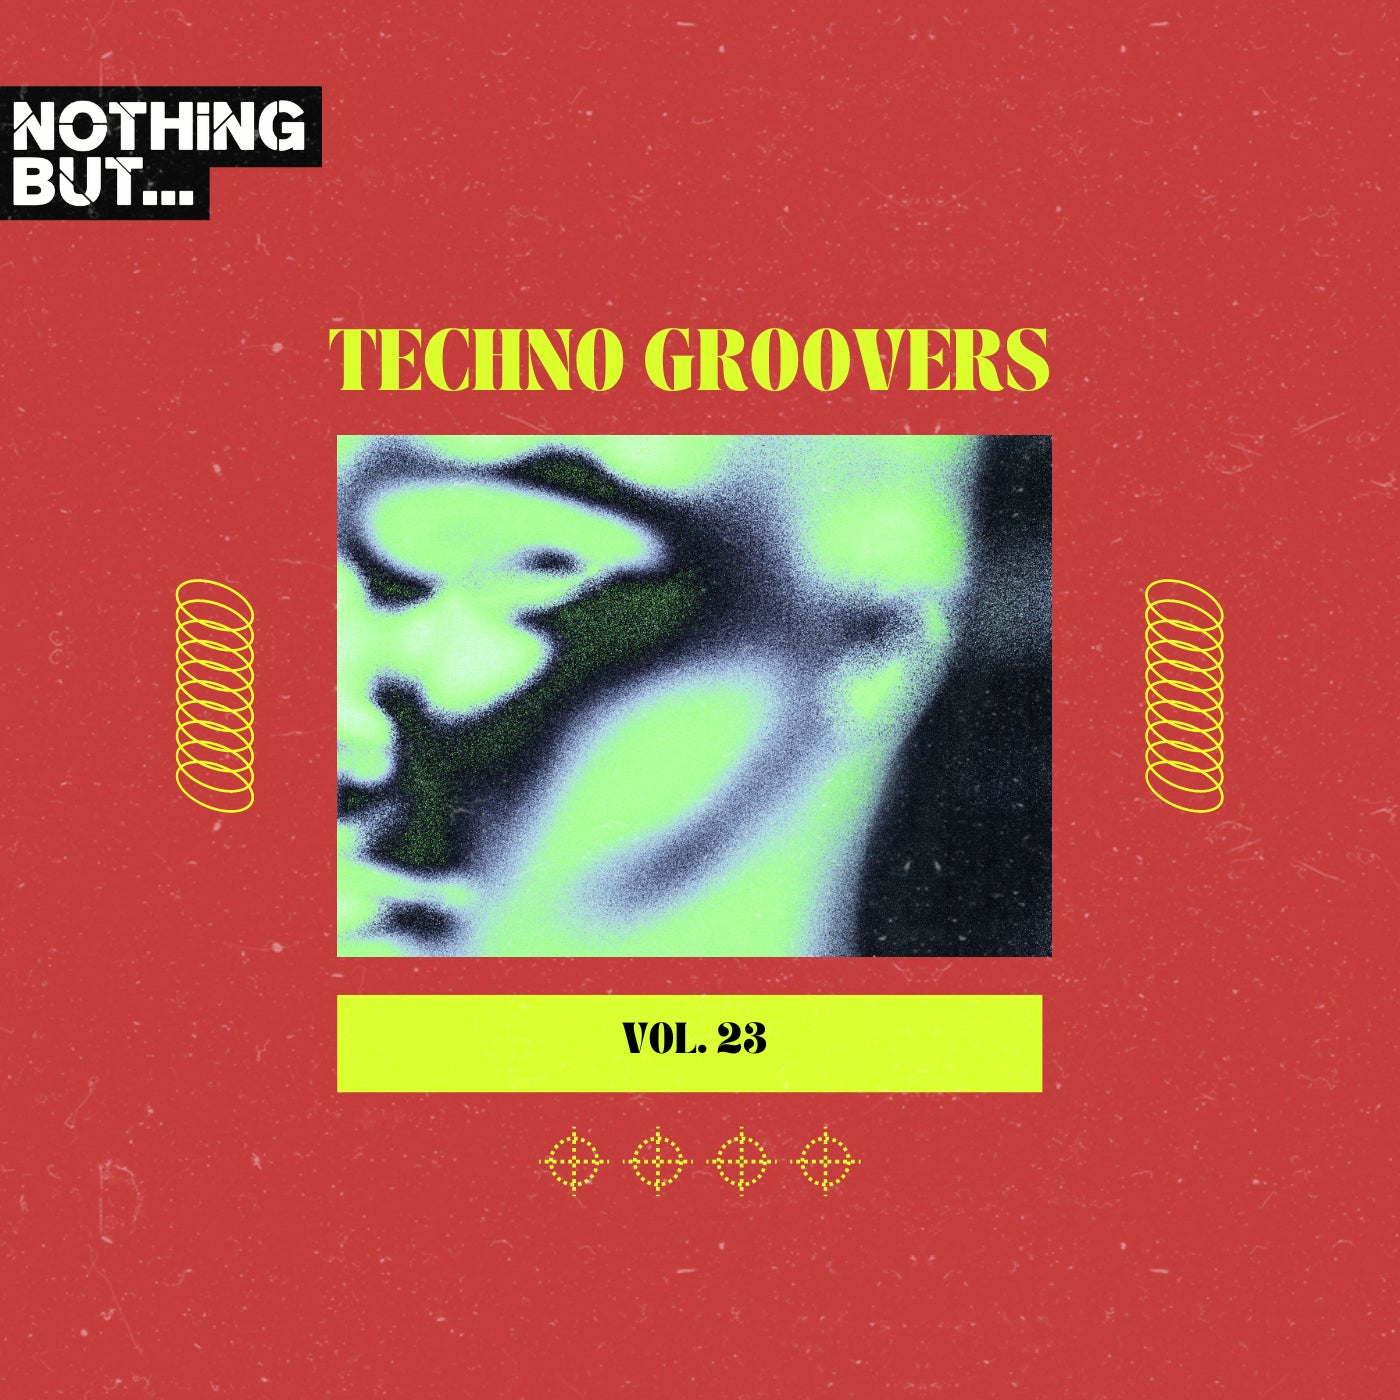 Nothing But... Techno Groovers, Vol. 23